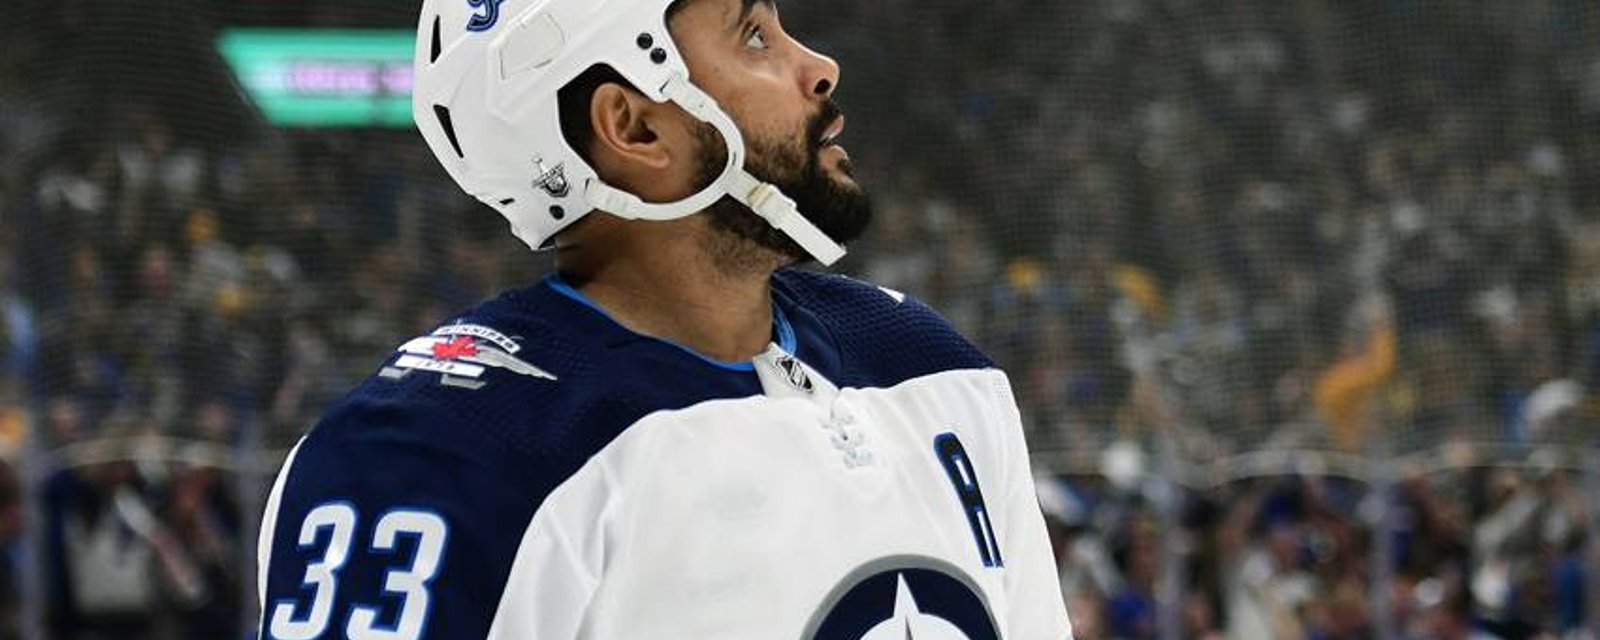 Dustin Byfuglien to end up with the Maple Leafs?!